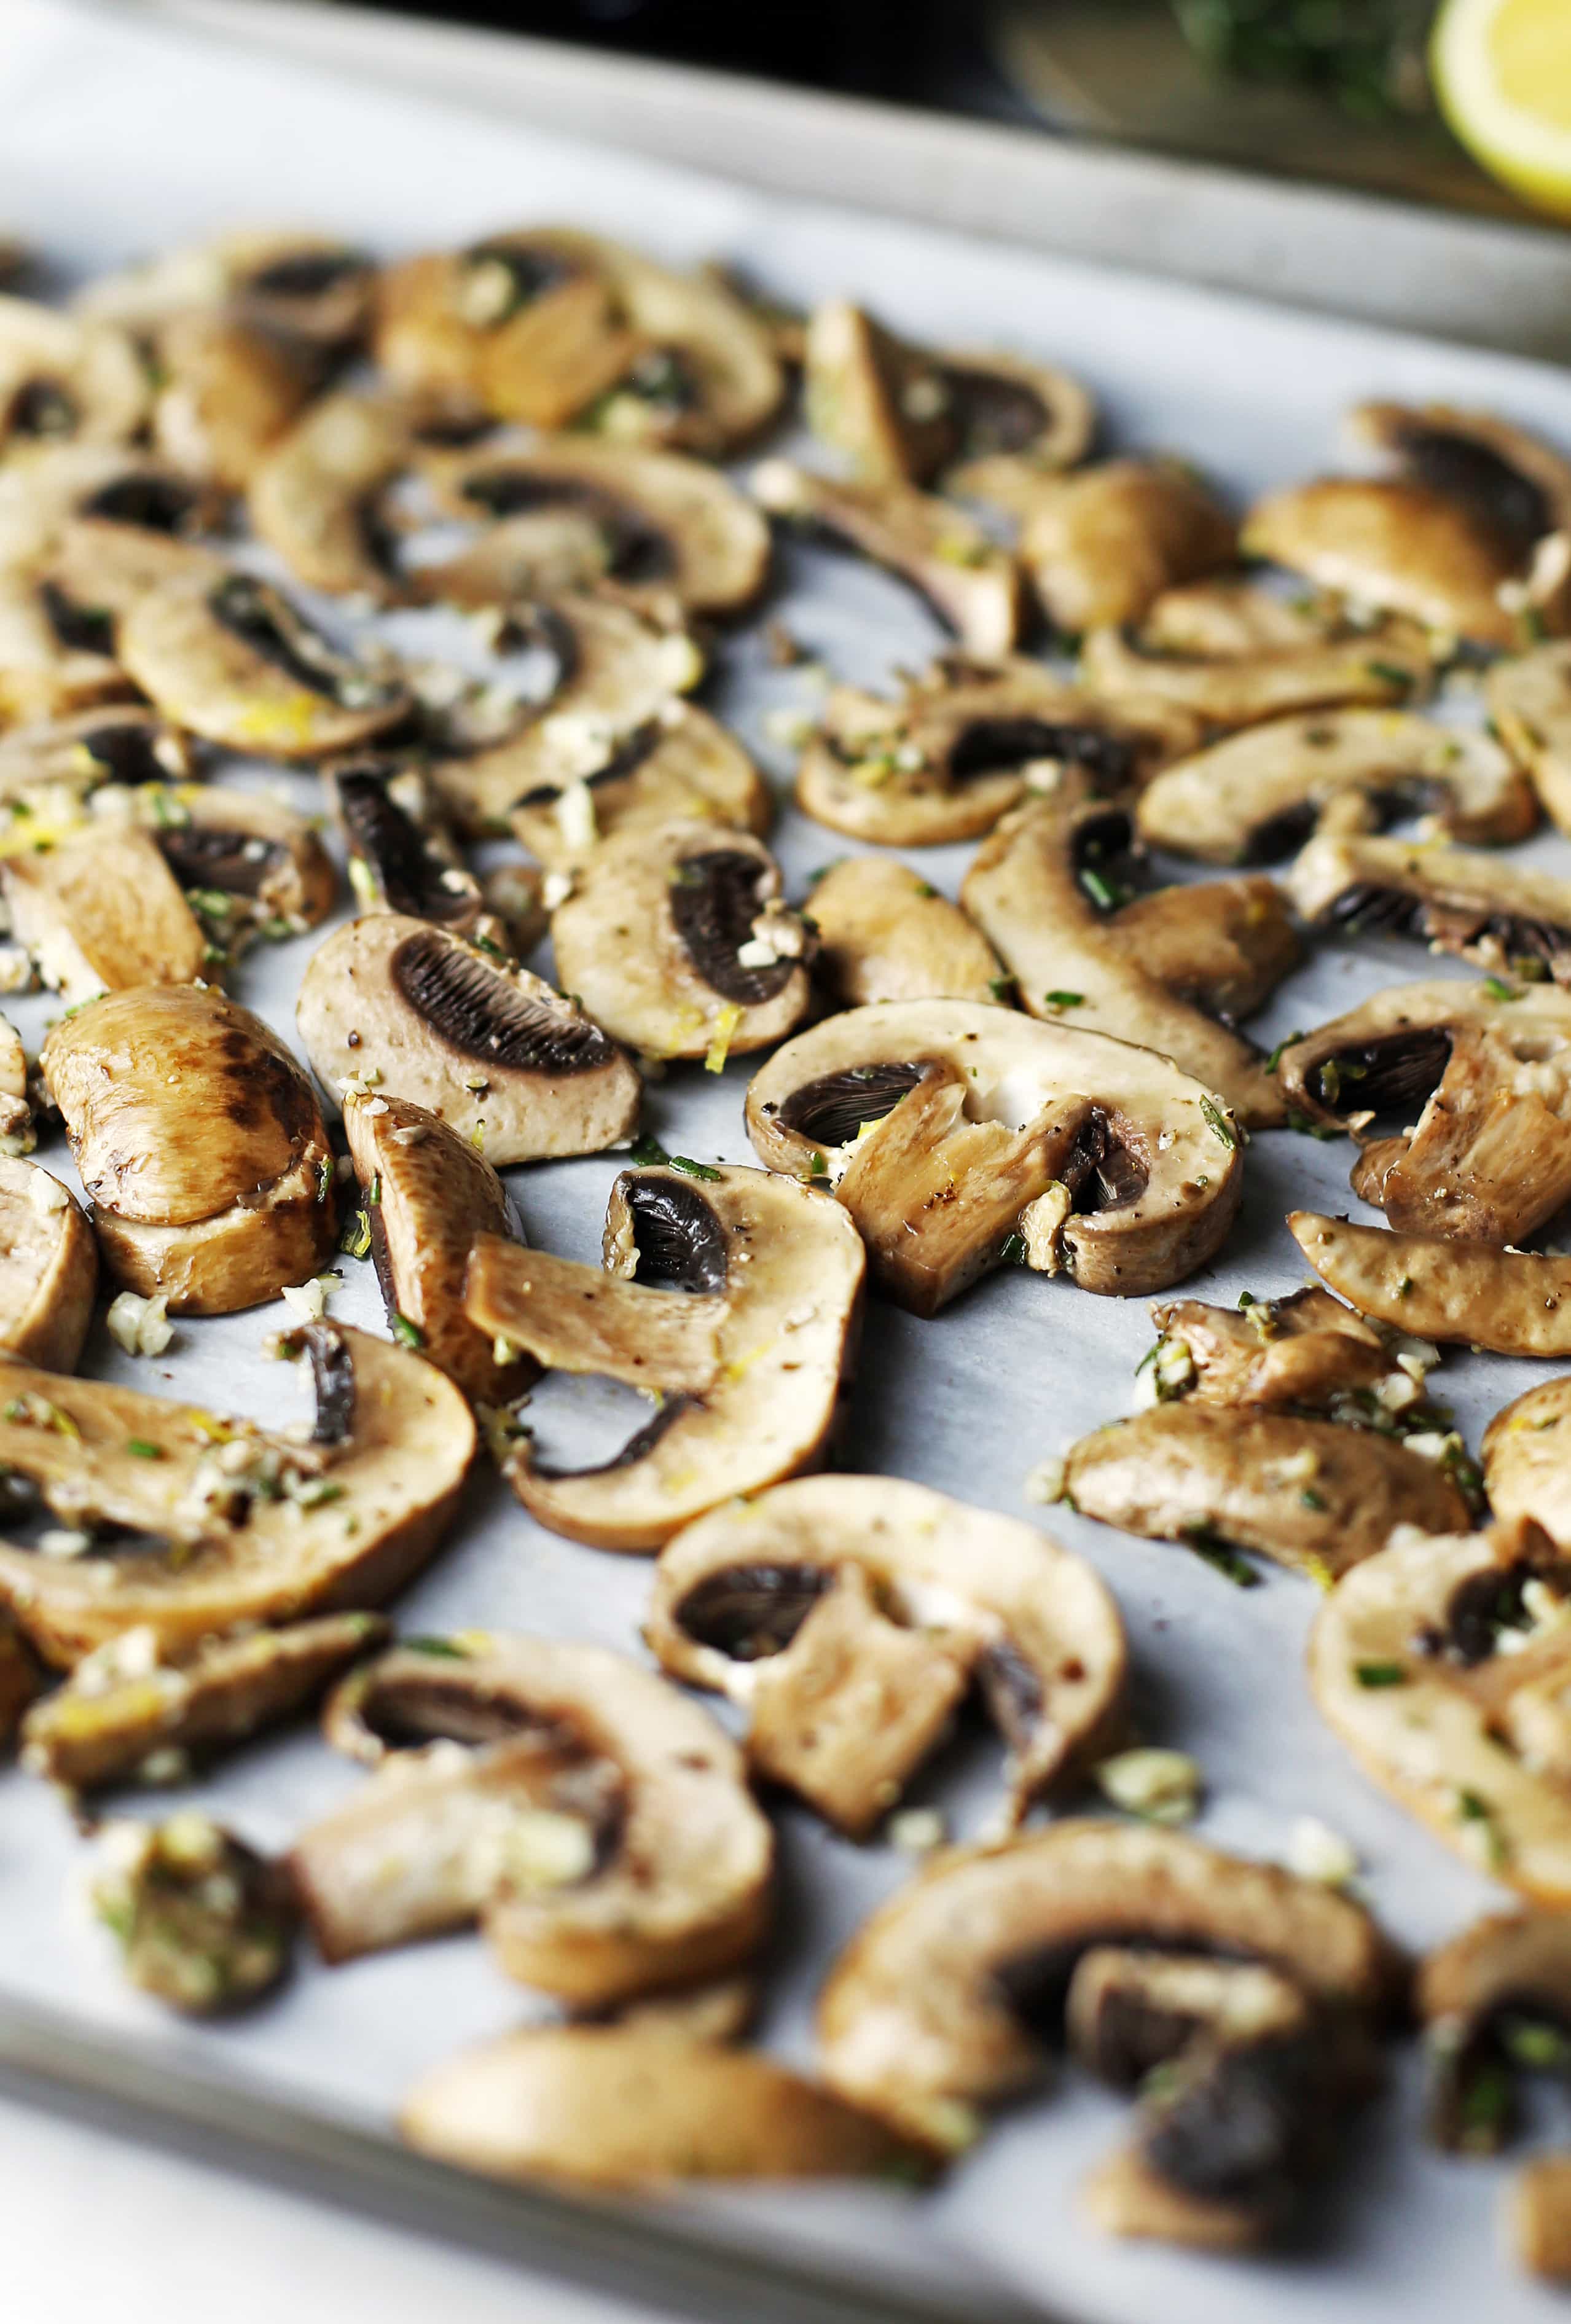 Sliced mushrooms with rosemary and garlic spread on a baking sheet.